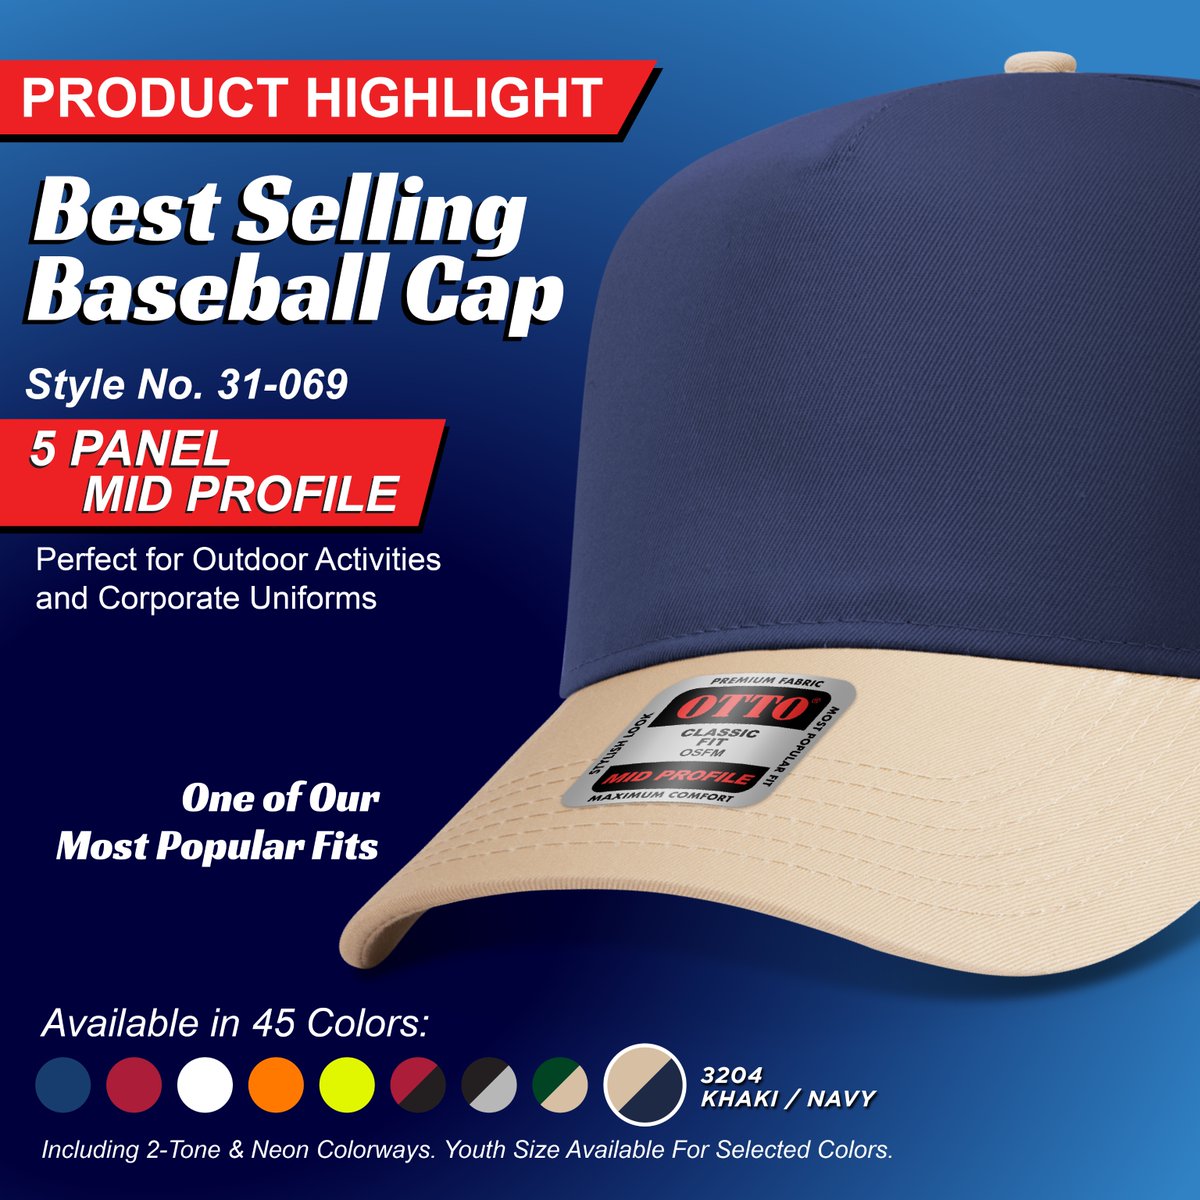 🔥 Get your hands on the best-selling baseball cap! Style No. 31-069 boasts a classic 5-panel low profile design, offering one of our most popular fits. 45 colors to choose from, you'll find the perfect hue! Select colors are available in youth sizes! #OTTOCAP #BaseballCap 🧢✨